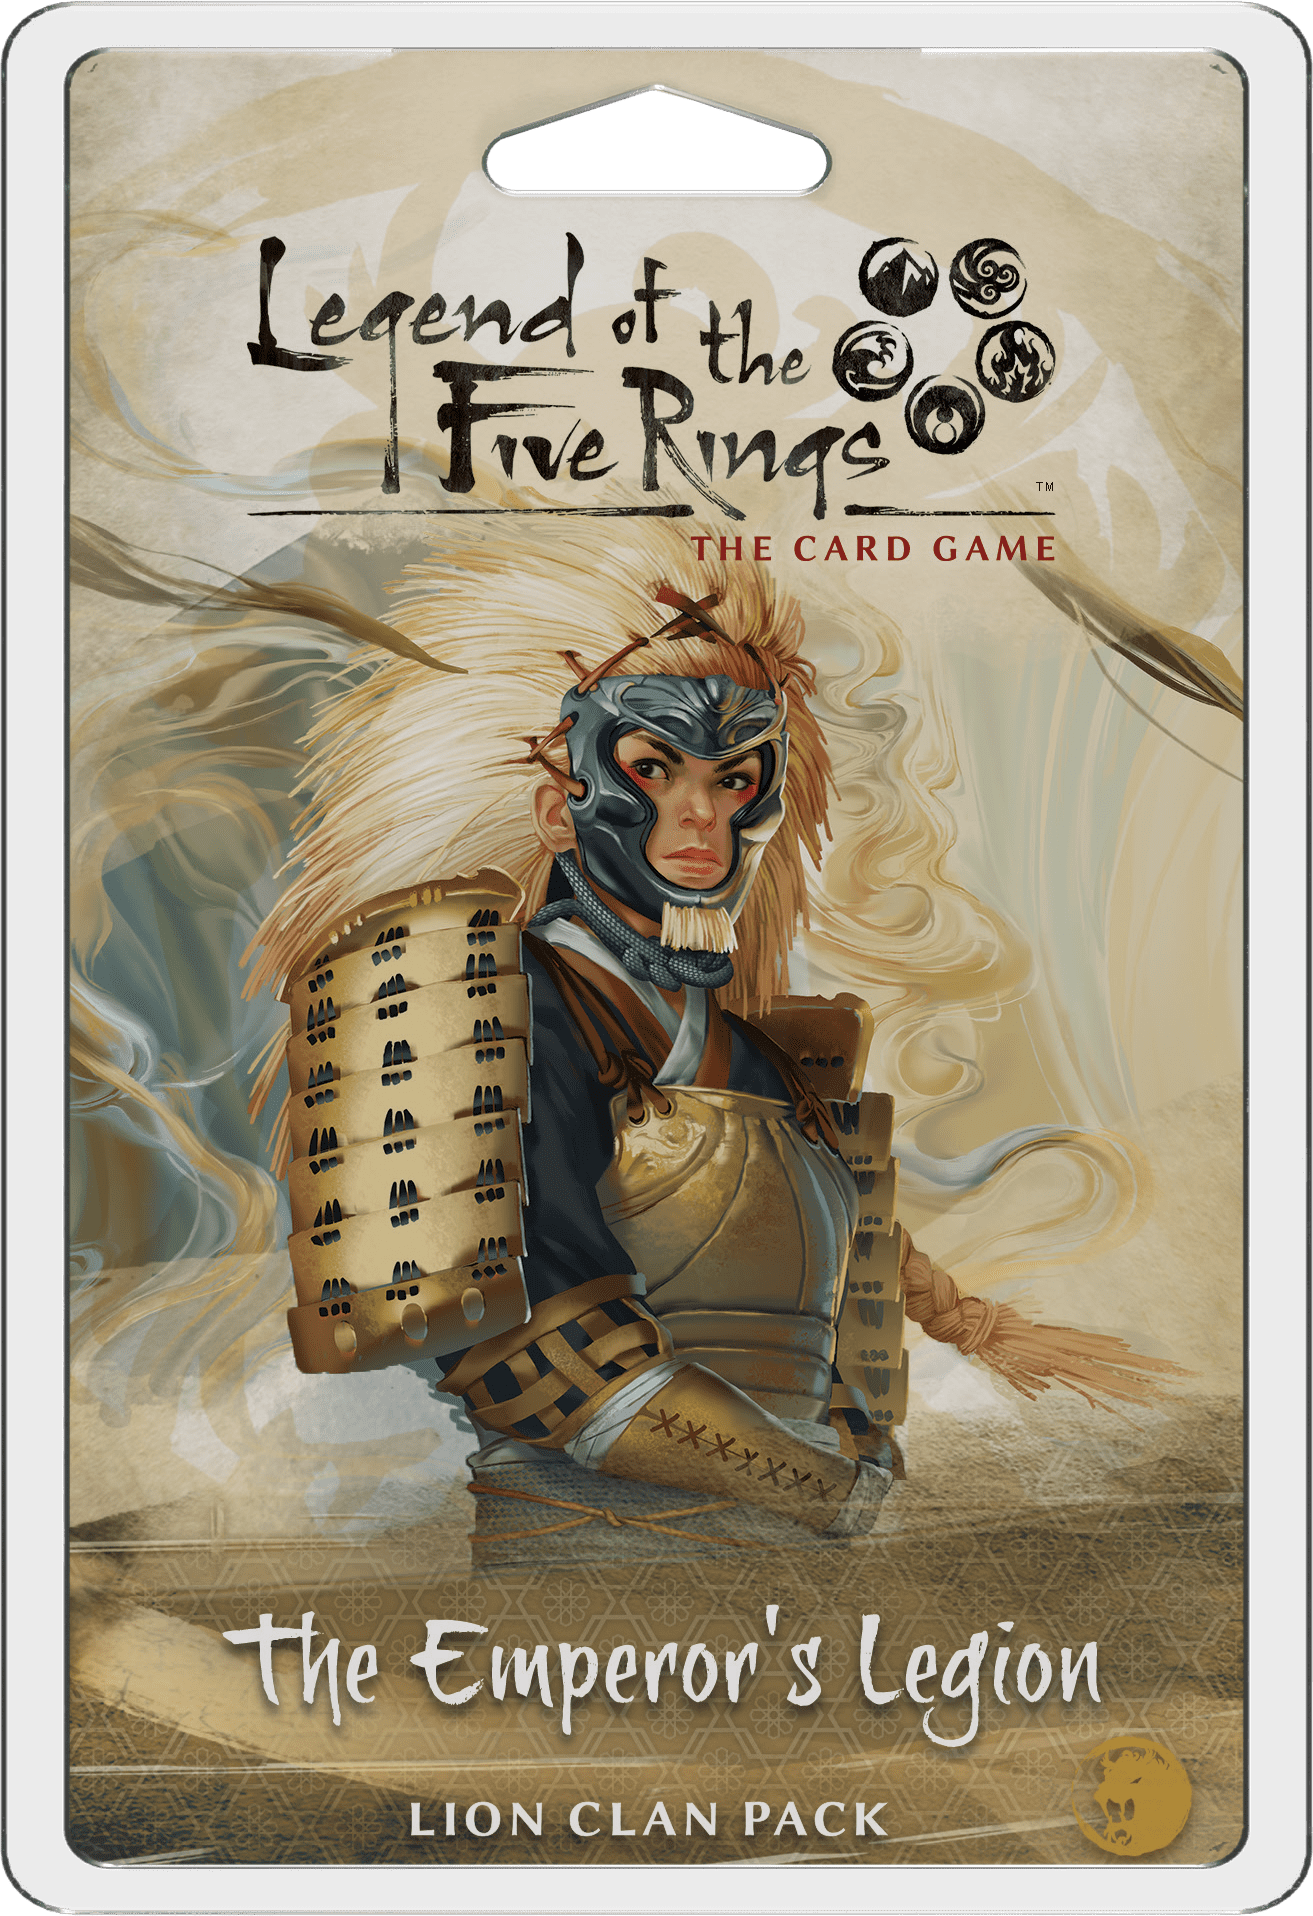 Legend of the Five Rings: The Card Game – The Emperor's Legion